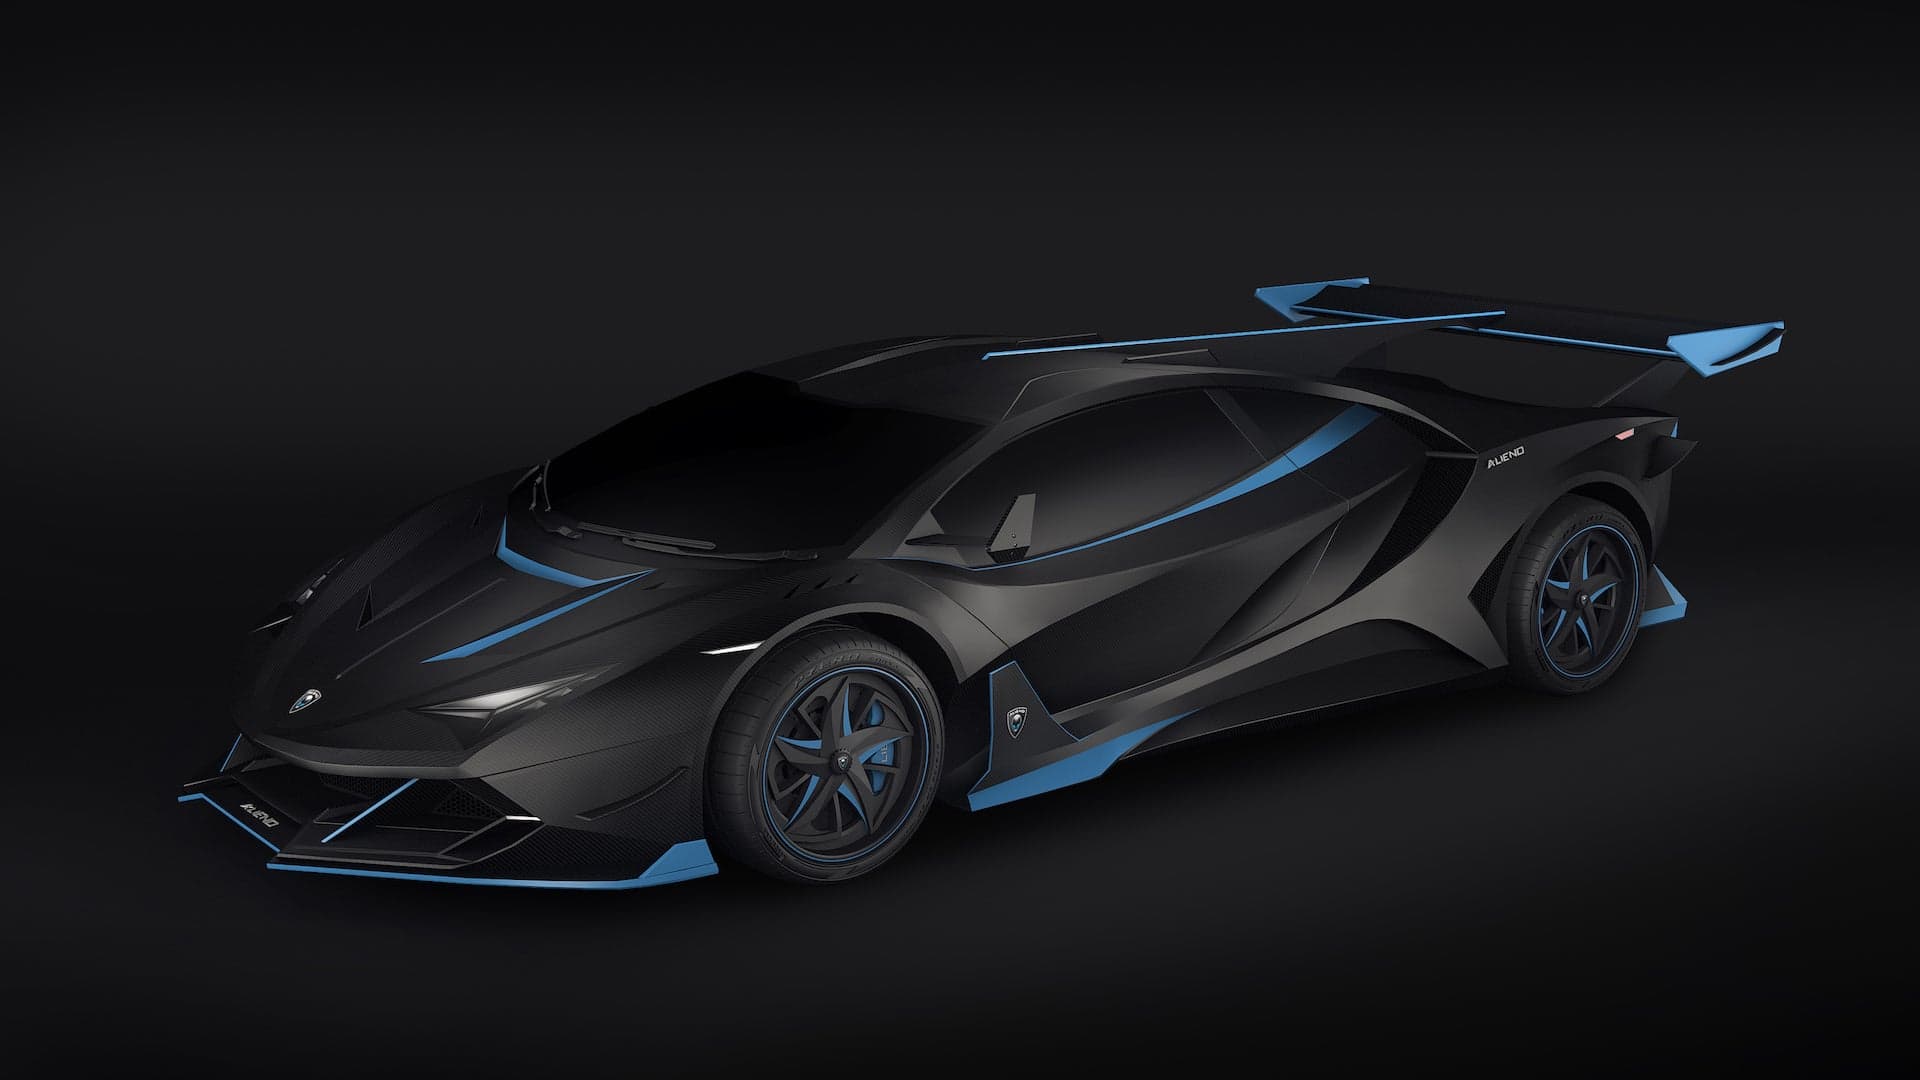 Bulgaria Built a 5,150-HP Electric Hypercar and it’s Out of This World